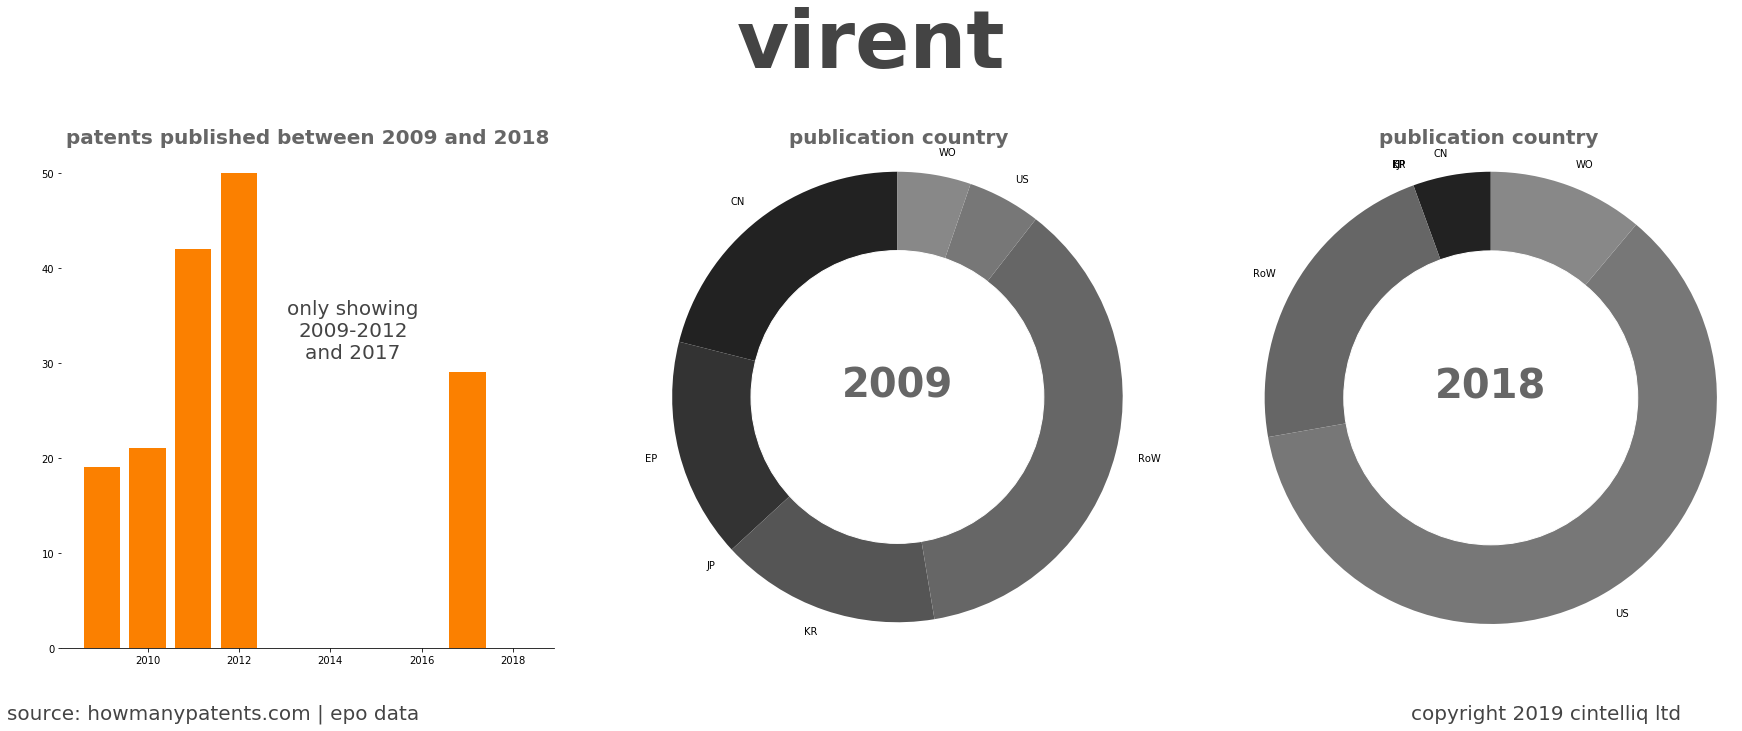 summary of patents for Virent